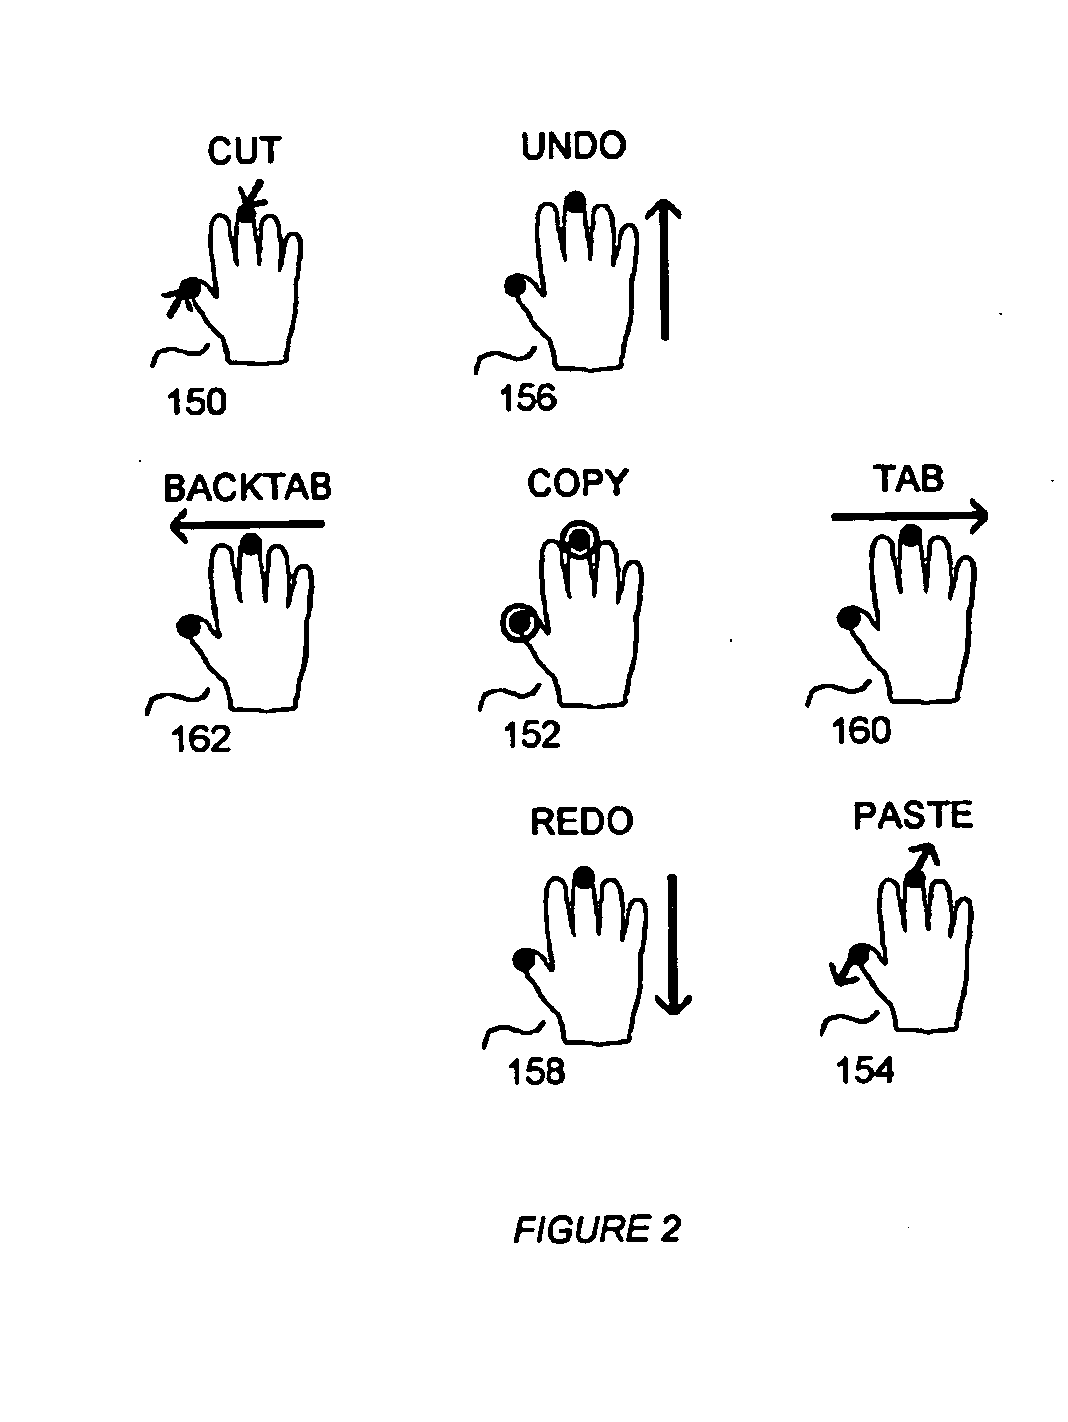 System and method for packing multitouch gestures onto a hand